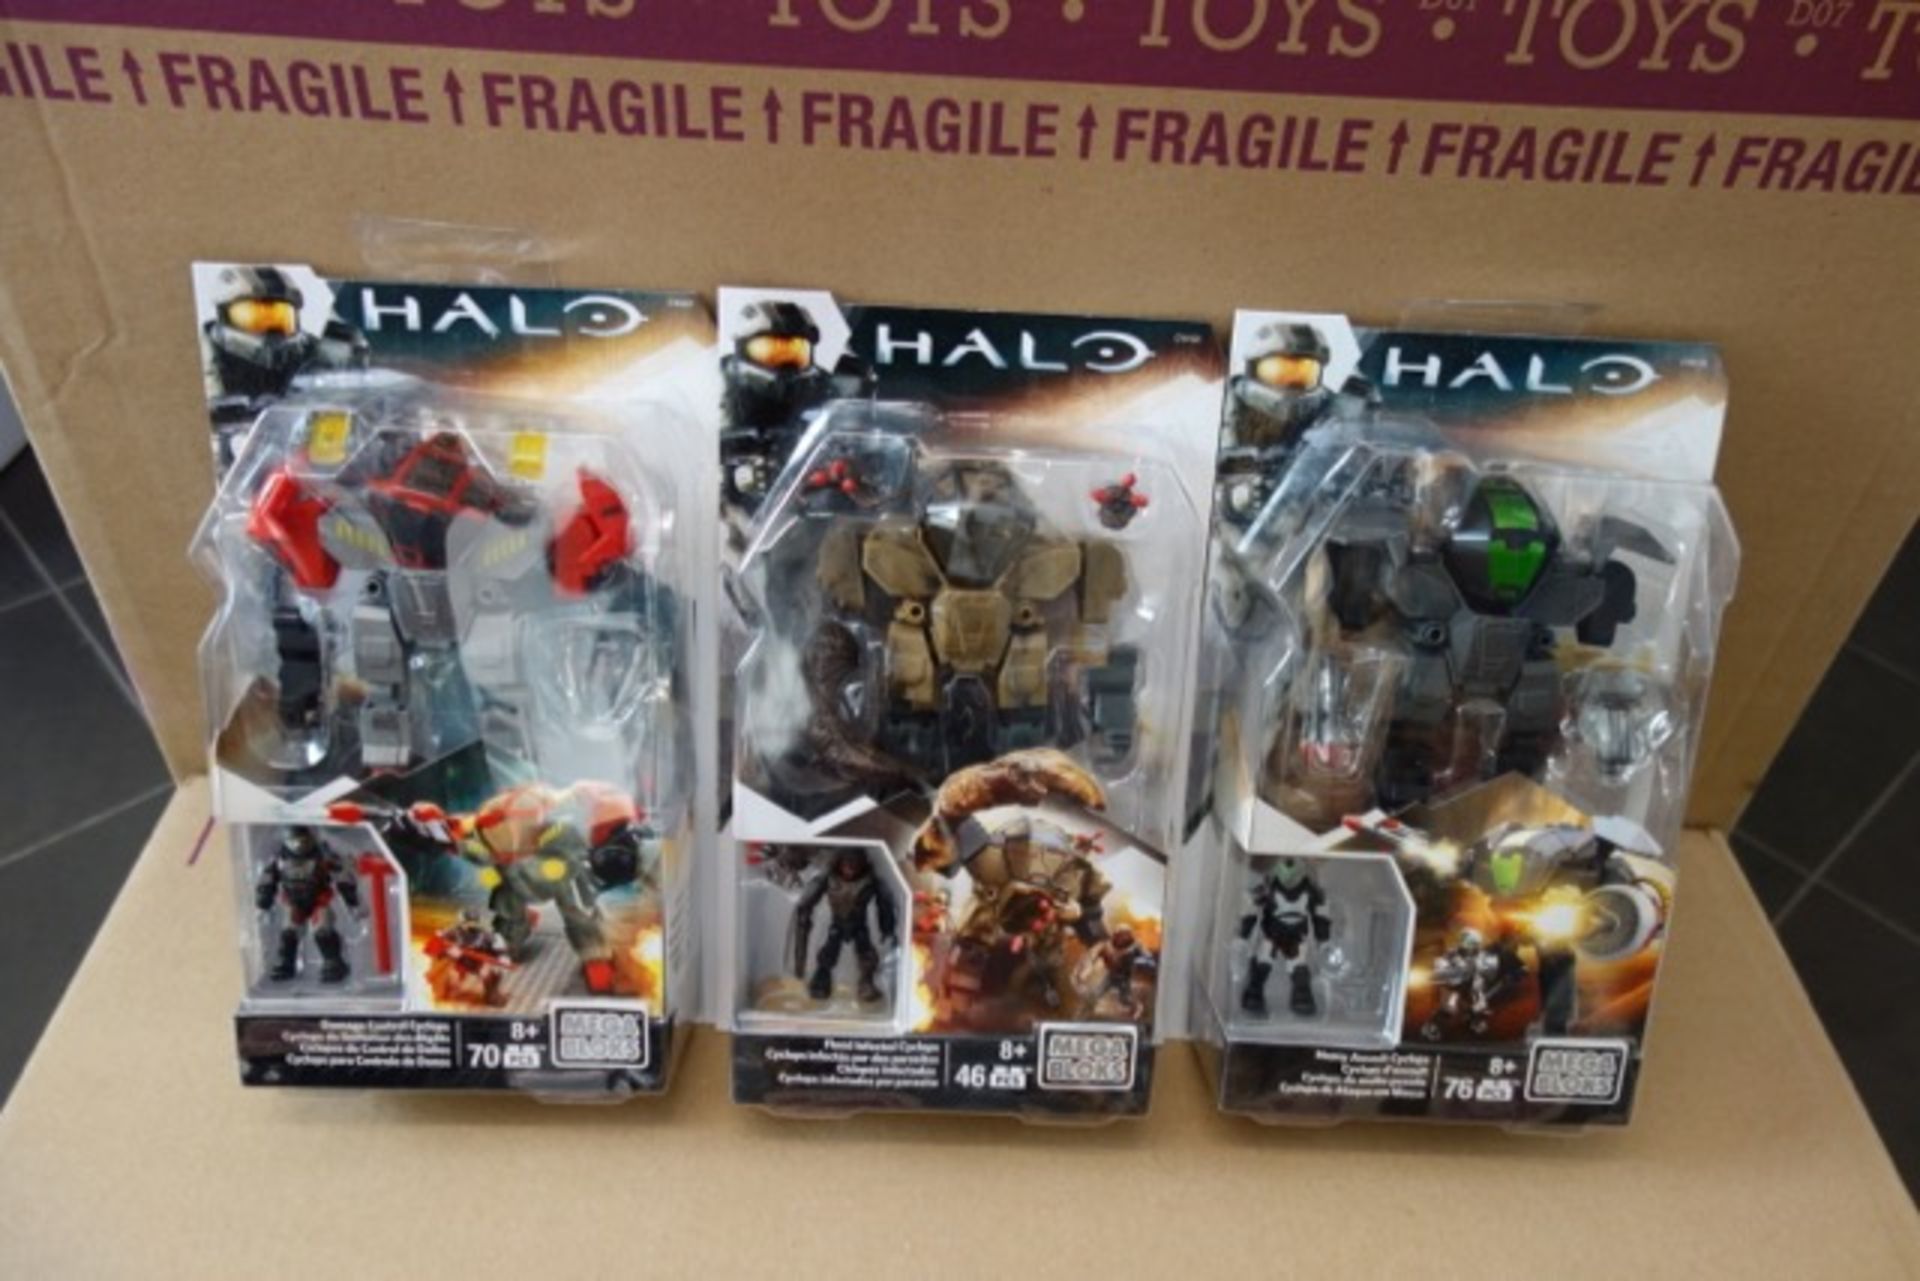 20 x Brand New Mega Bloks Halo Cyclops - Includes a mix of: Damage control cyclops, Flood infected